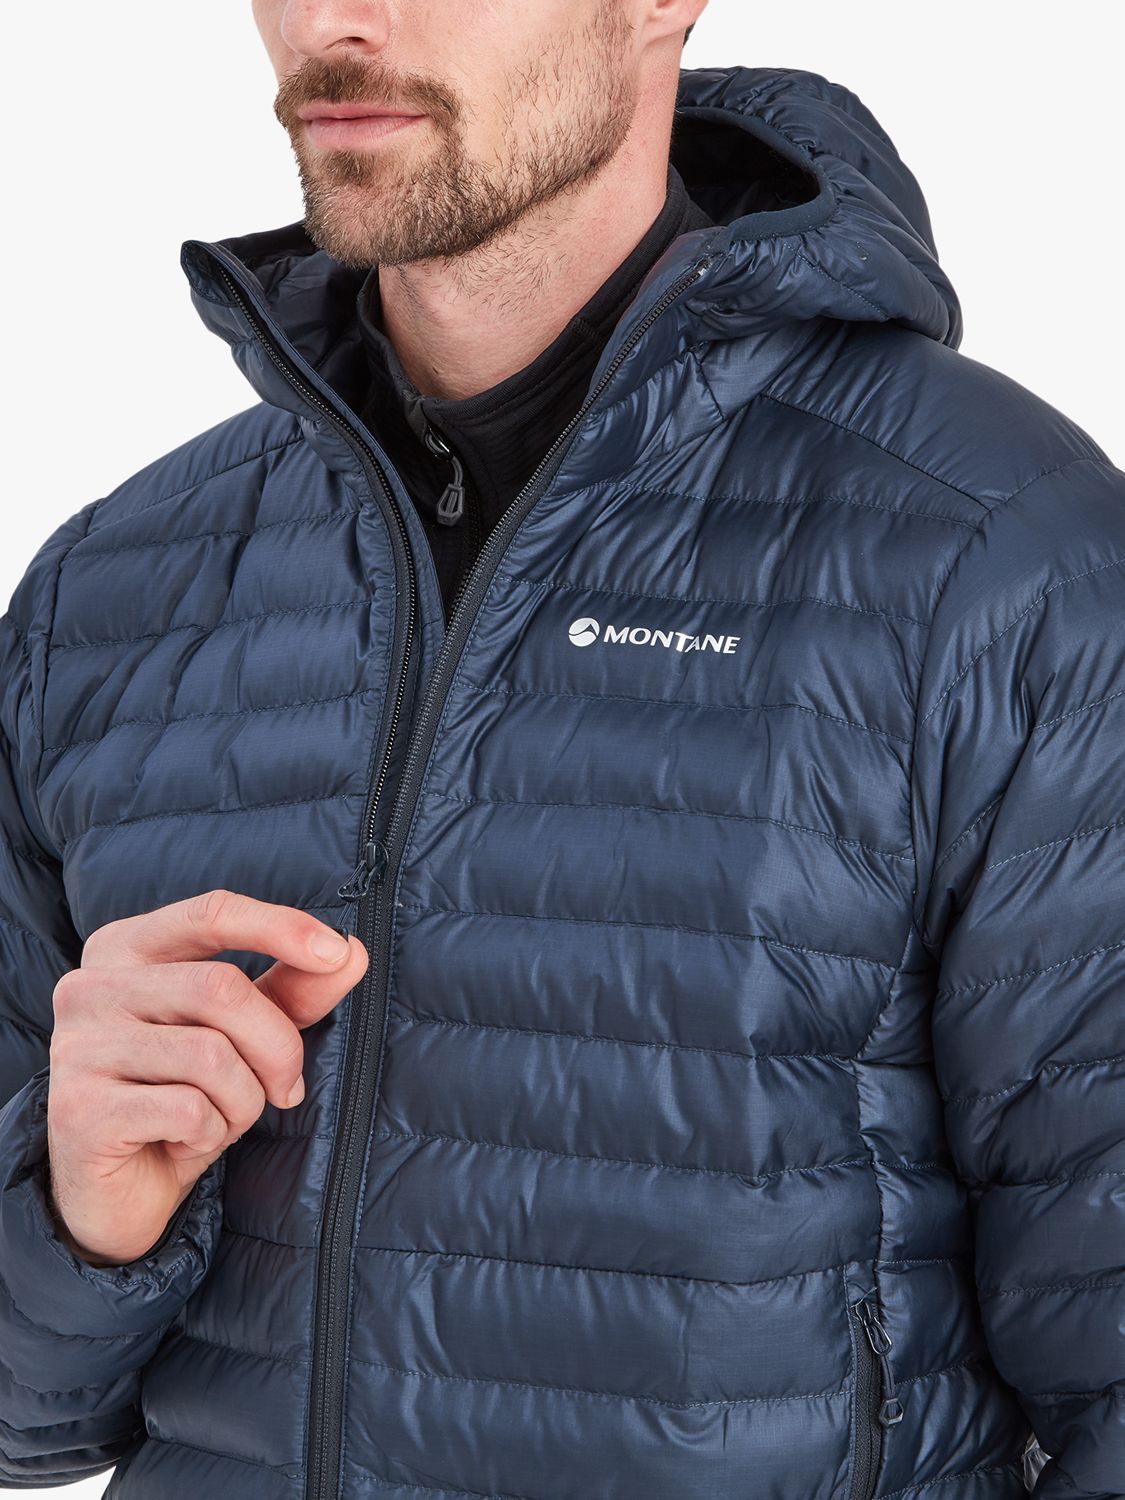 Montane Icarus Hooded Jacket, Eclipse Blue, M